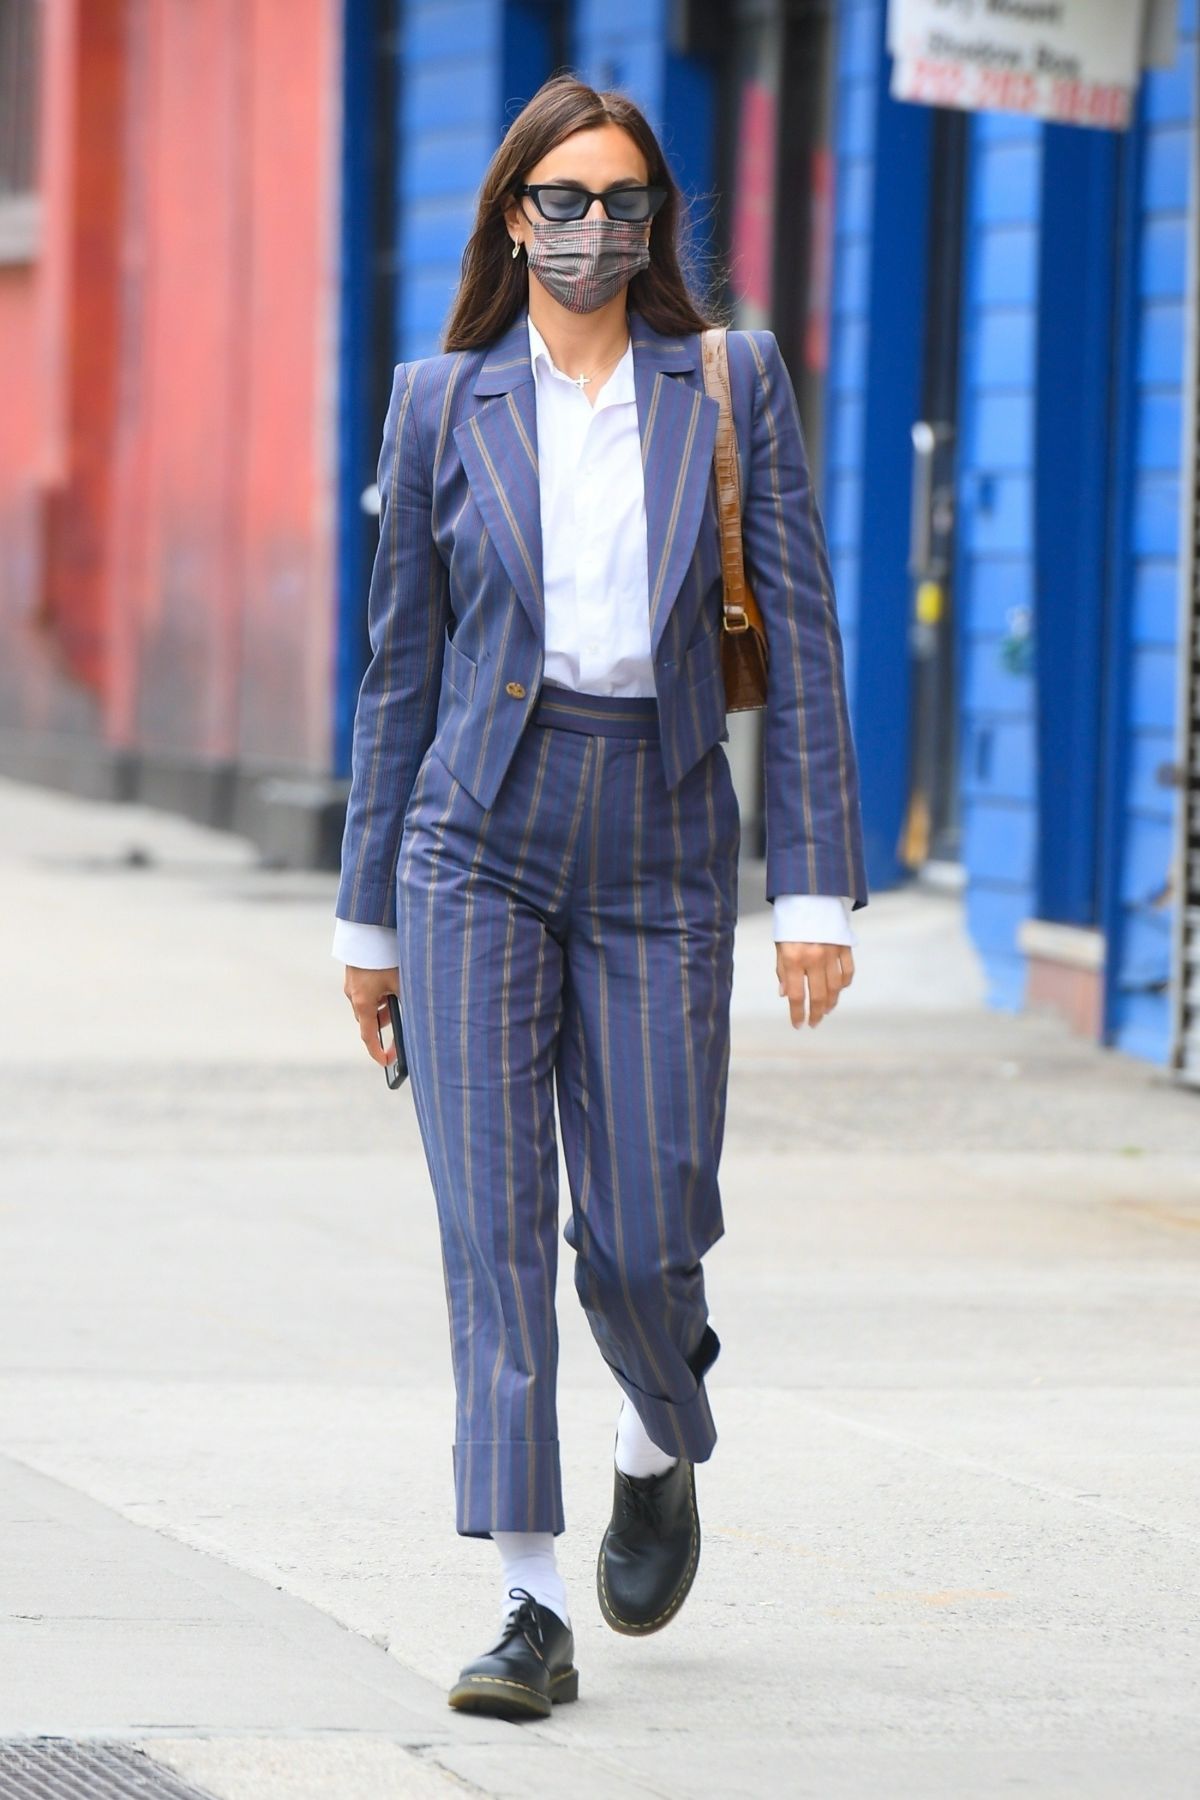 irina-shayk-out-and-about-in-new-york-05-03-2021-0.jpg